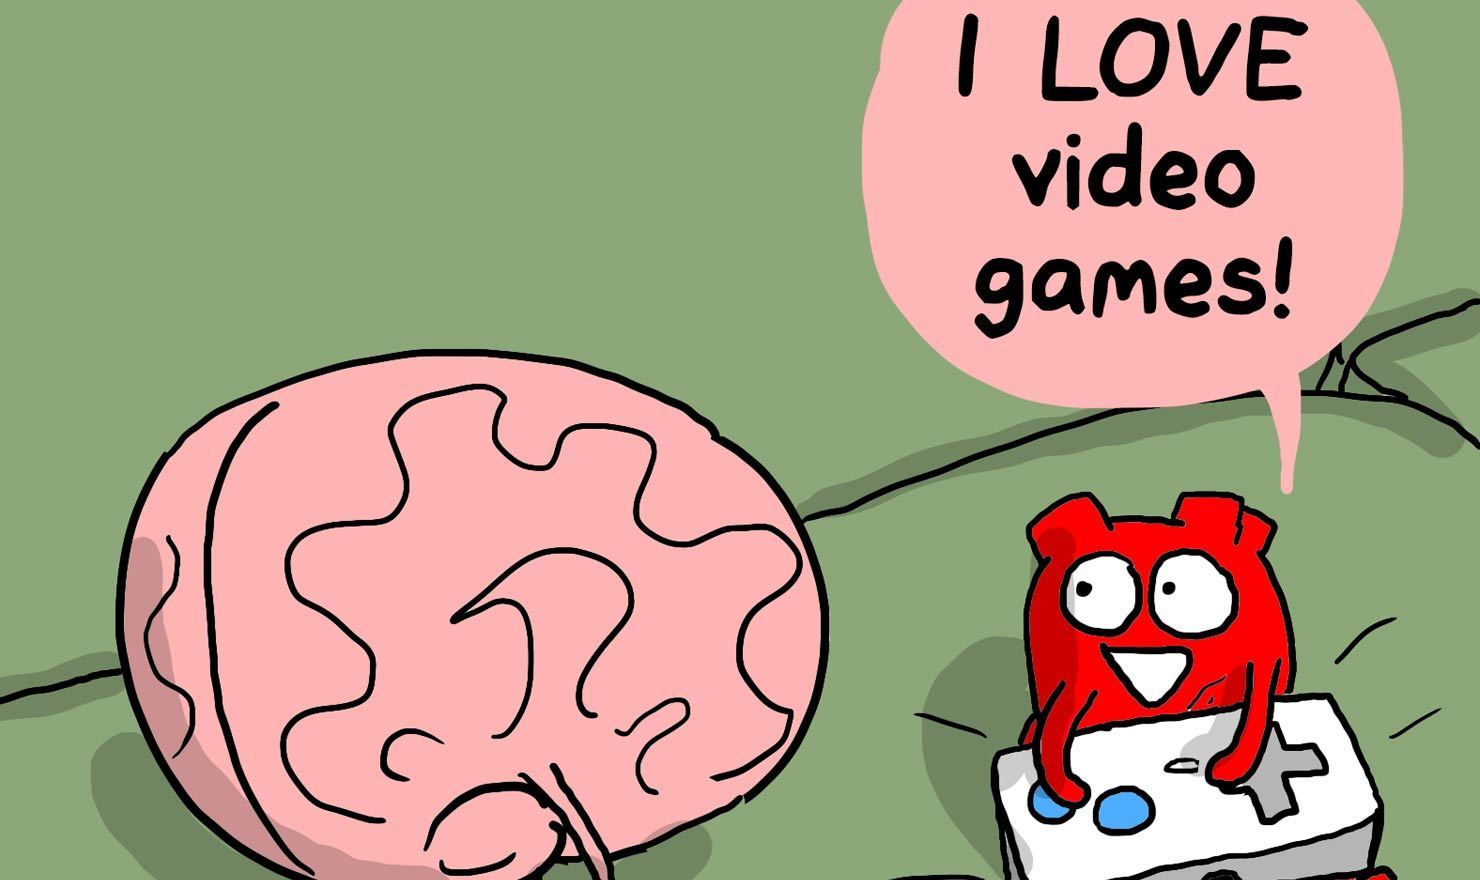 10 Comics To Power Up Your National Video Games Day